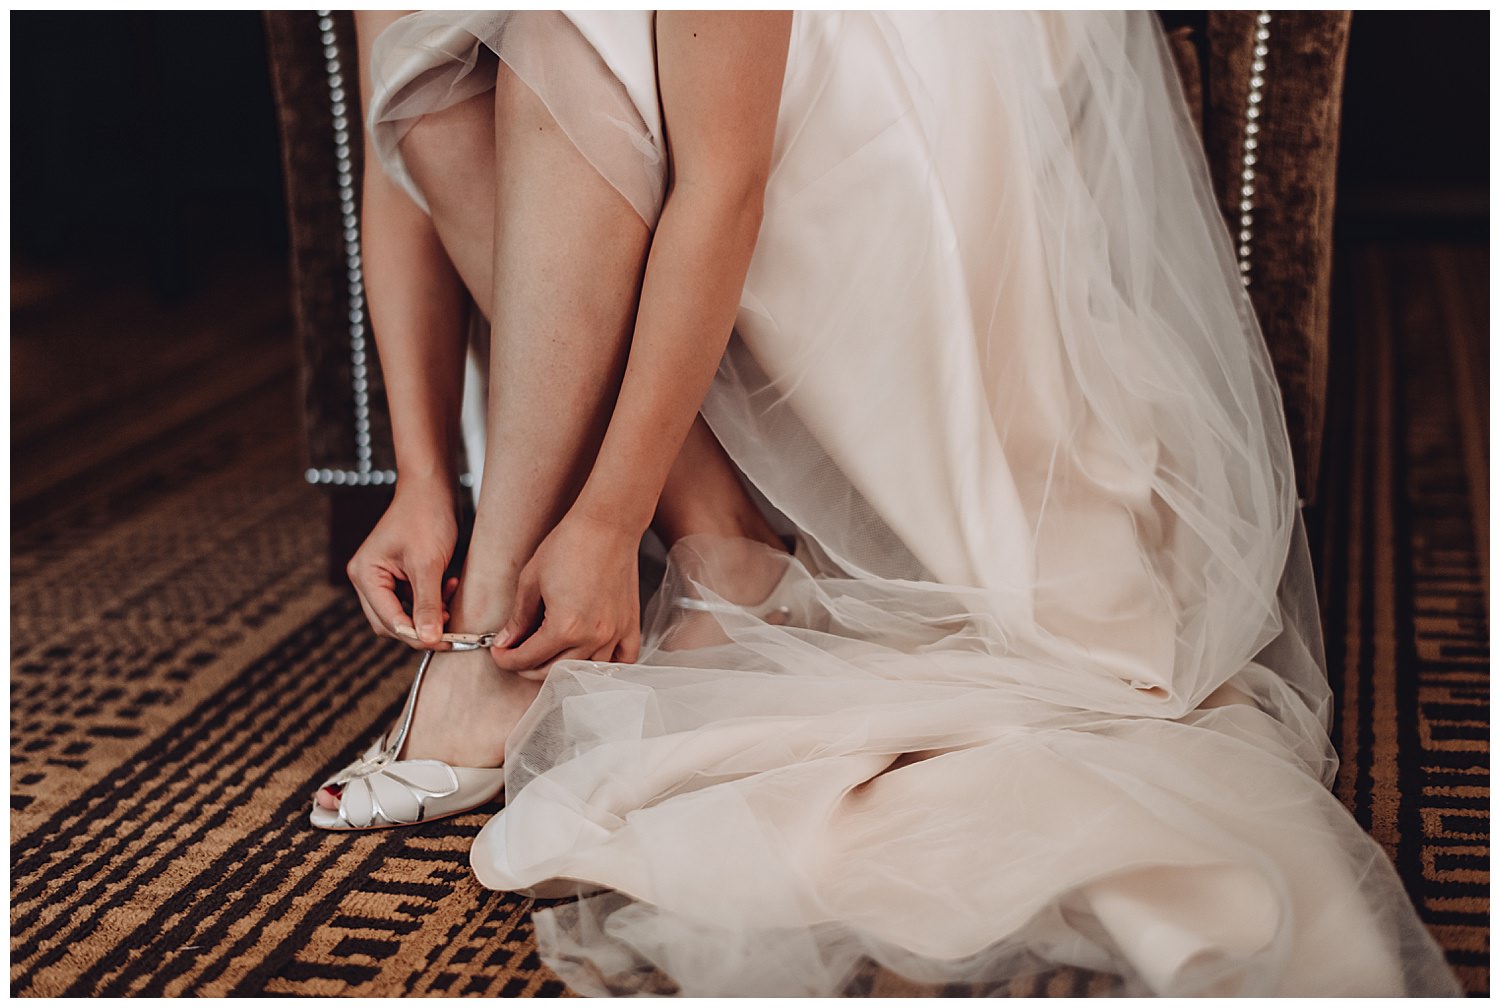 The carleton of Oak Park Wedding getting ready, bride putting shoes on